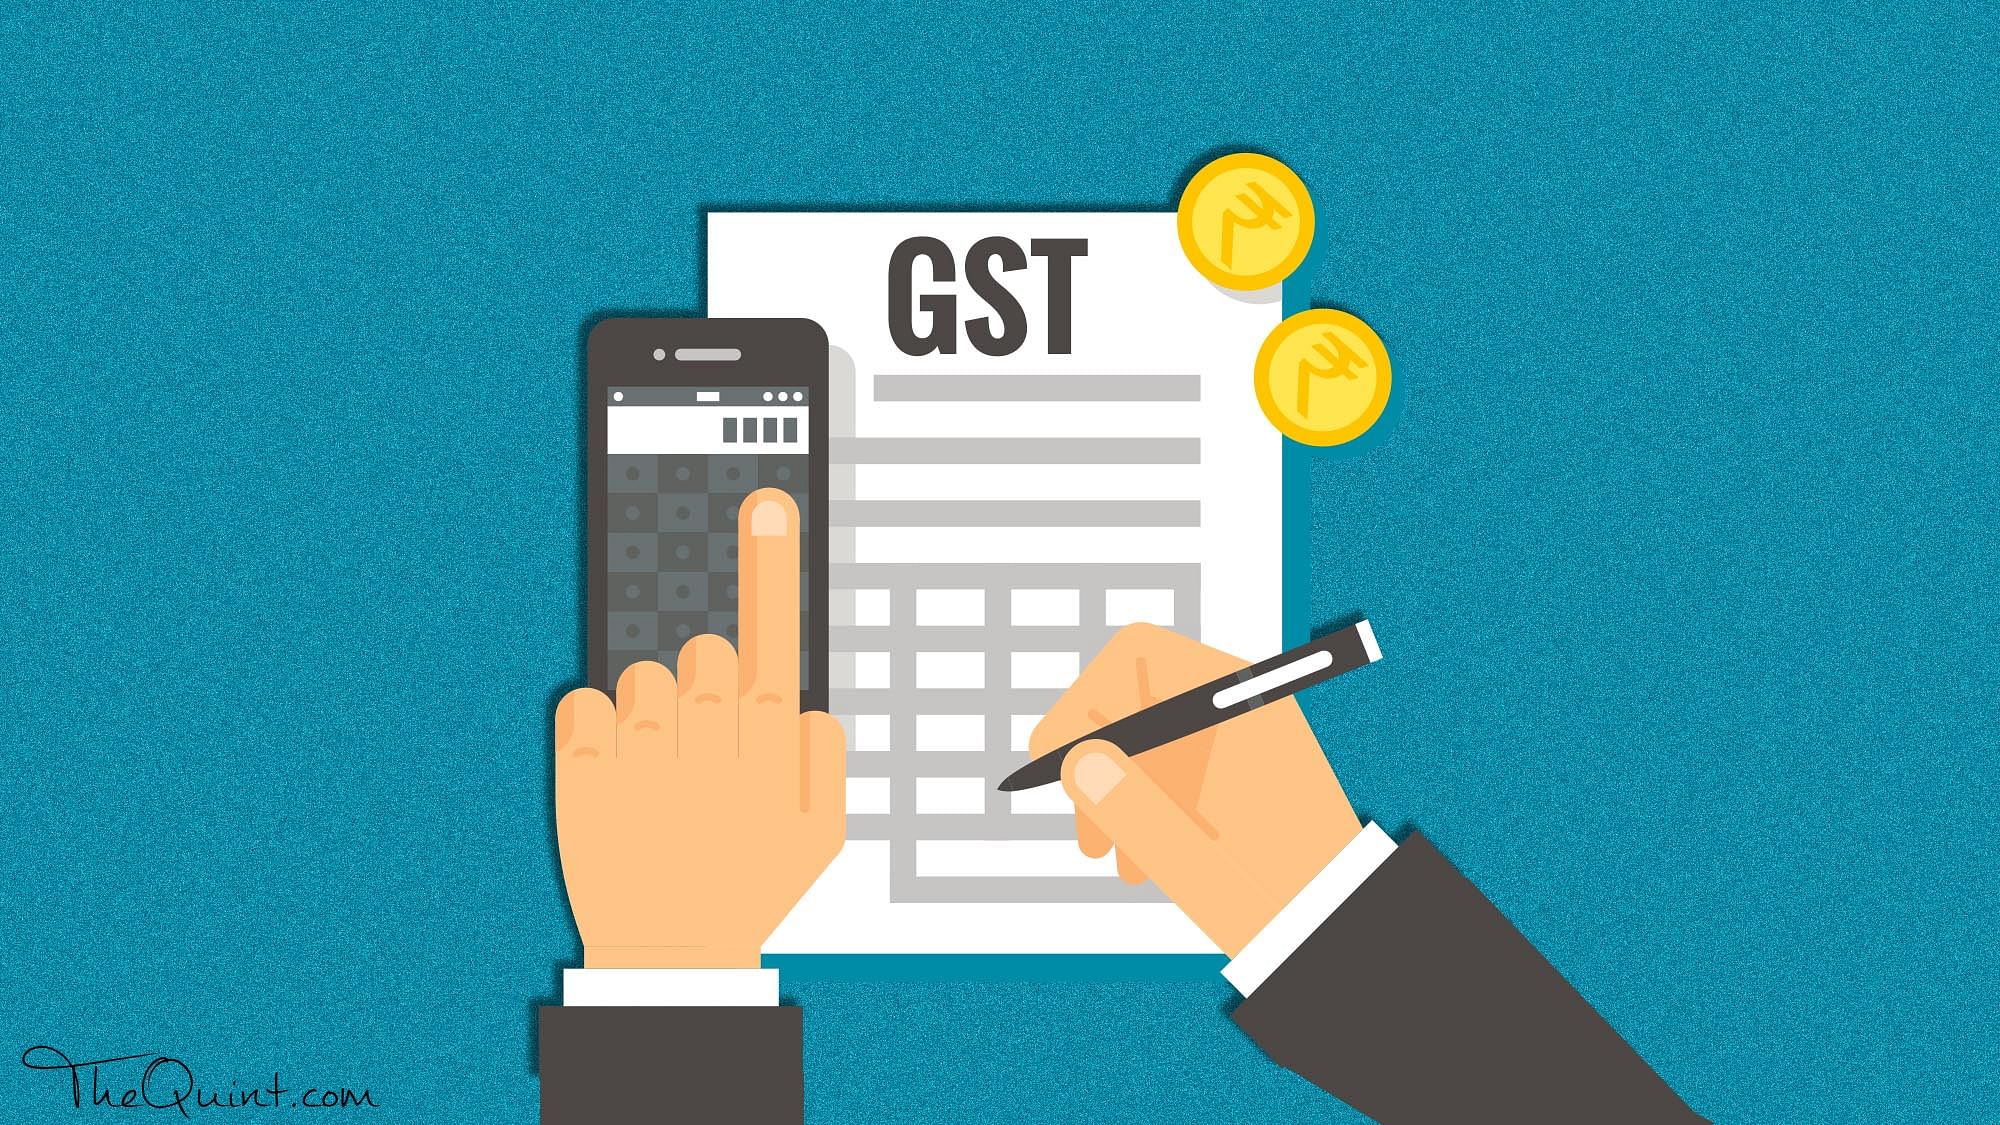 GST Council decided to cut rates on various items like 32-inch television sets, power banks and lithium ion batteries among others things.&nbsp;